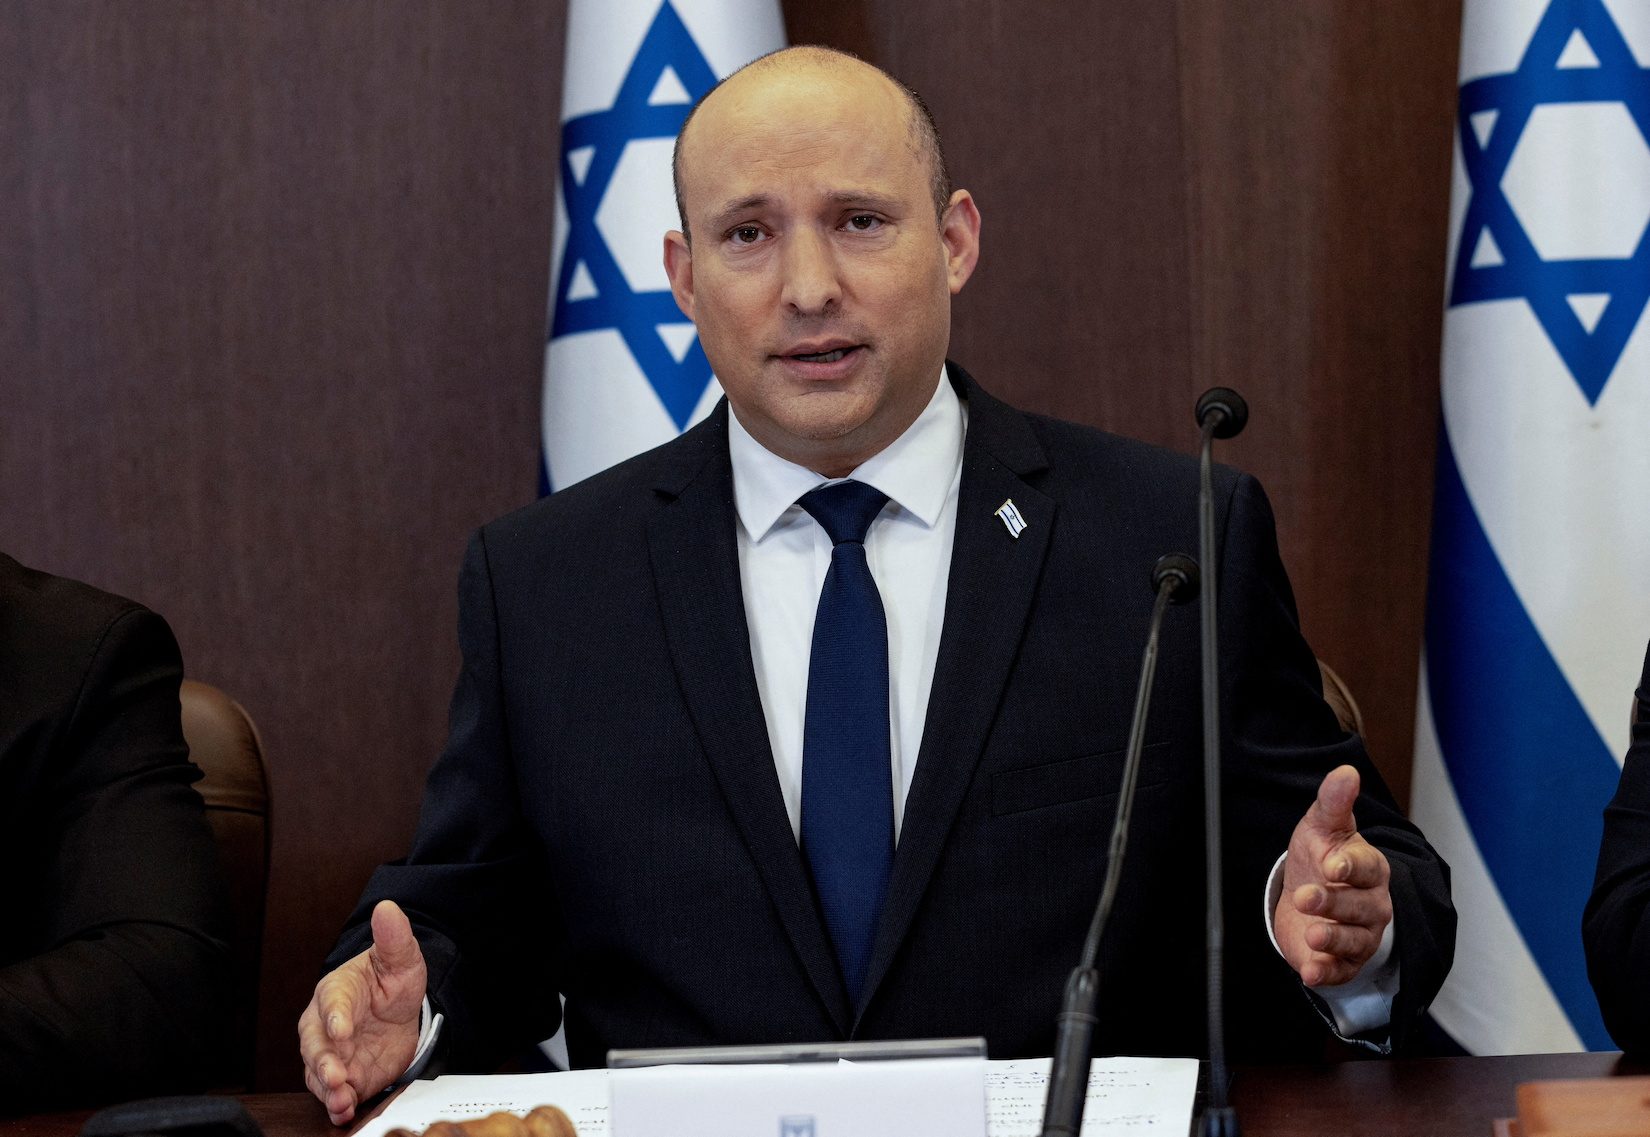 Ministers in outgoing Israeli government vow to block Netanyahu comeback